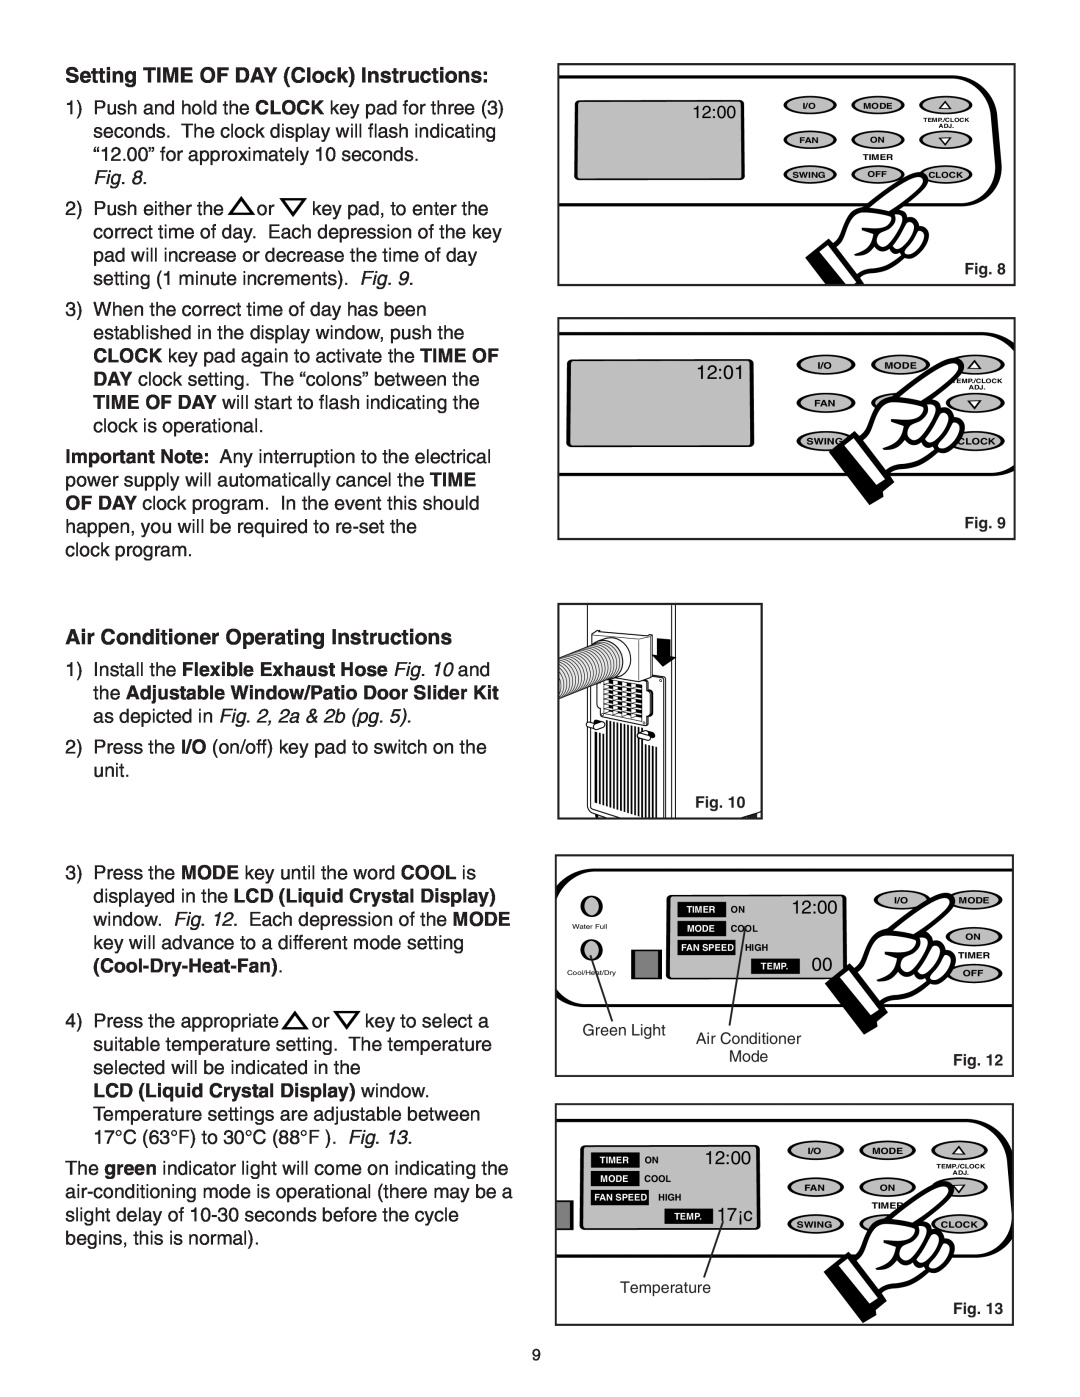 Danby SPAC8499 manual Setting TIME OF DAY Clock Instructions, Air Conditioner Operating Instructions, 12:01 